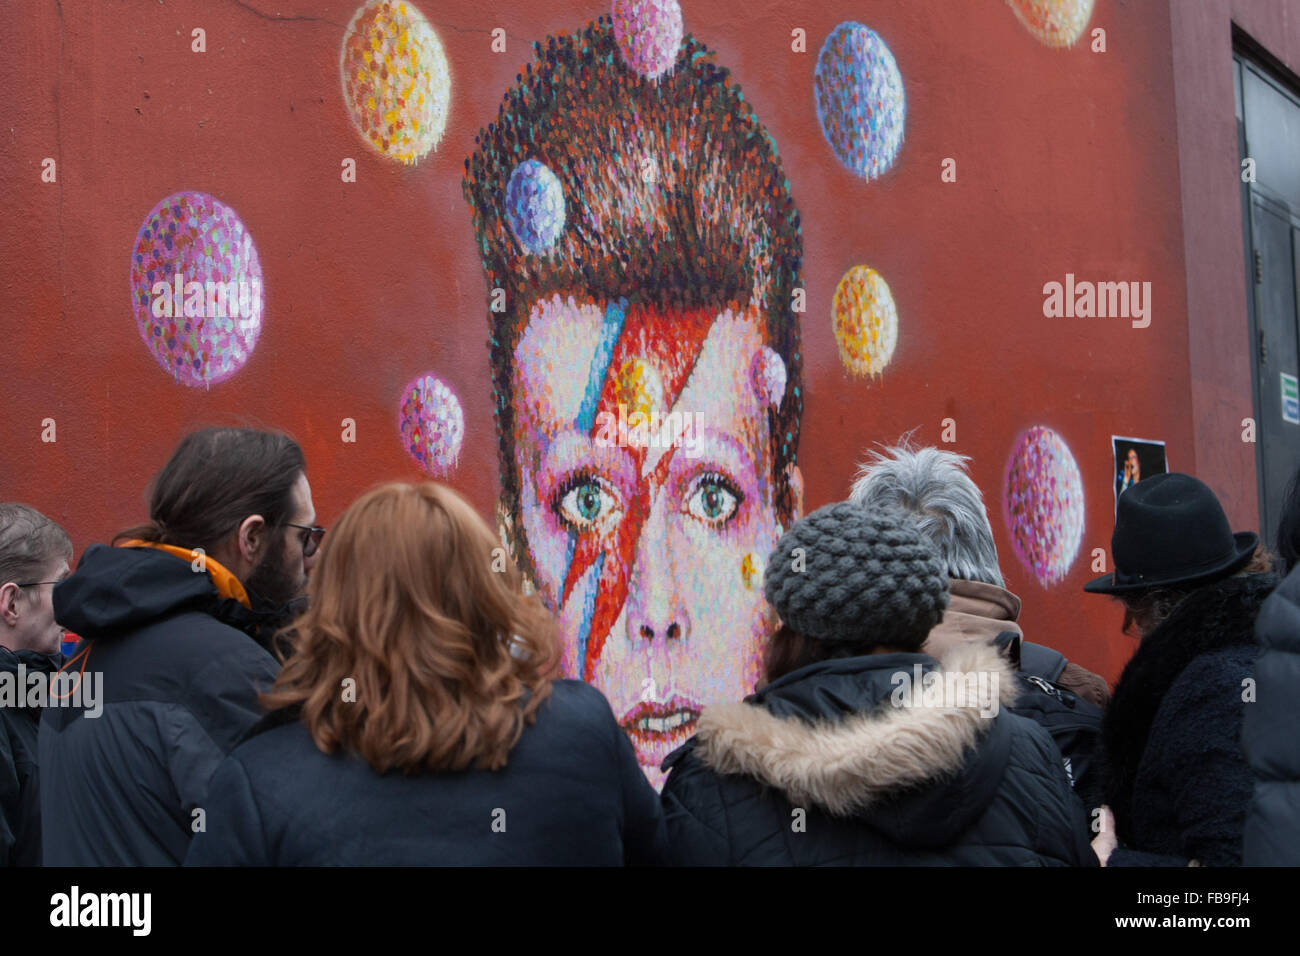 Tributes and messages from fans lie beneath a mural of the late David Bowie Brixton Underground station, London, UK. © martyn wheatley/Alamy Live News Stock Photo